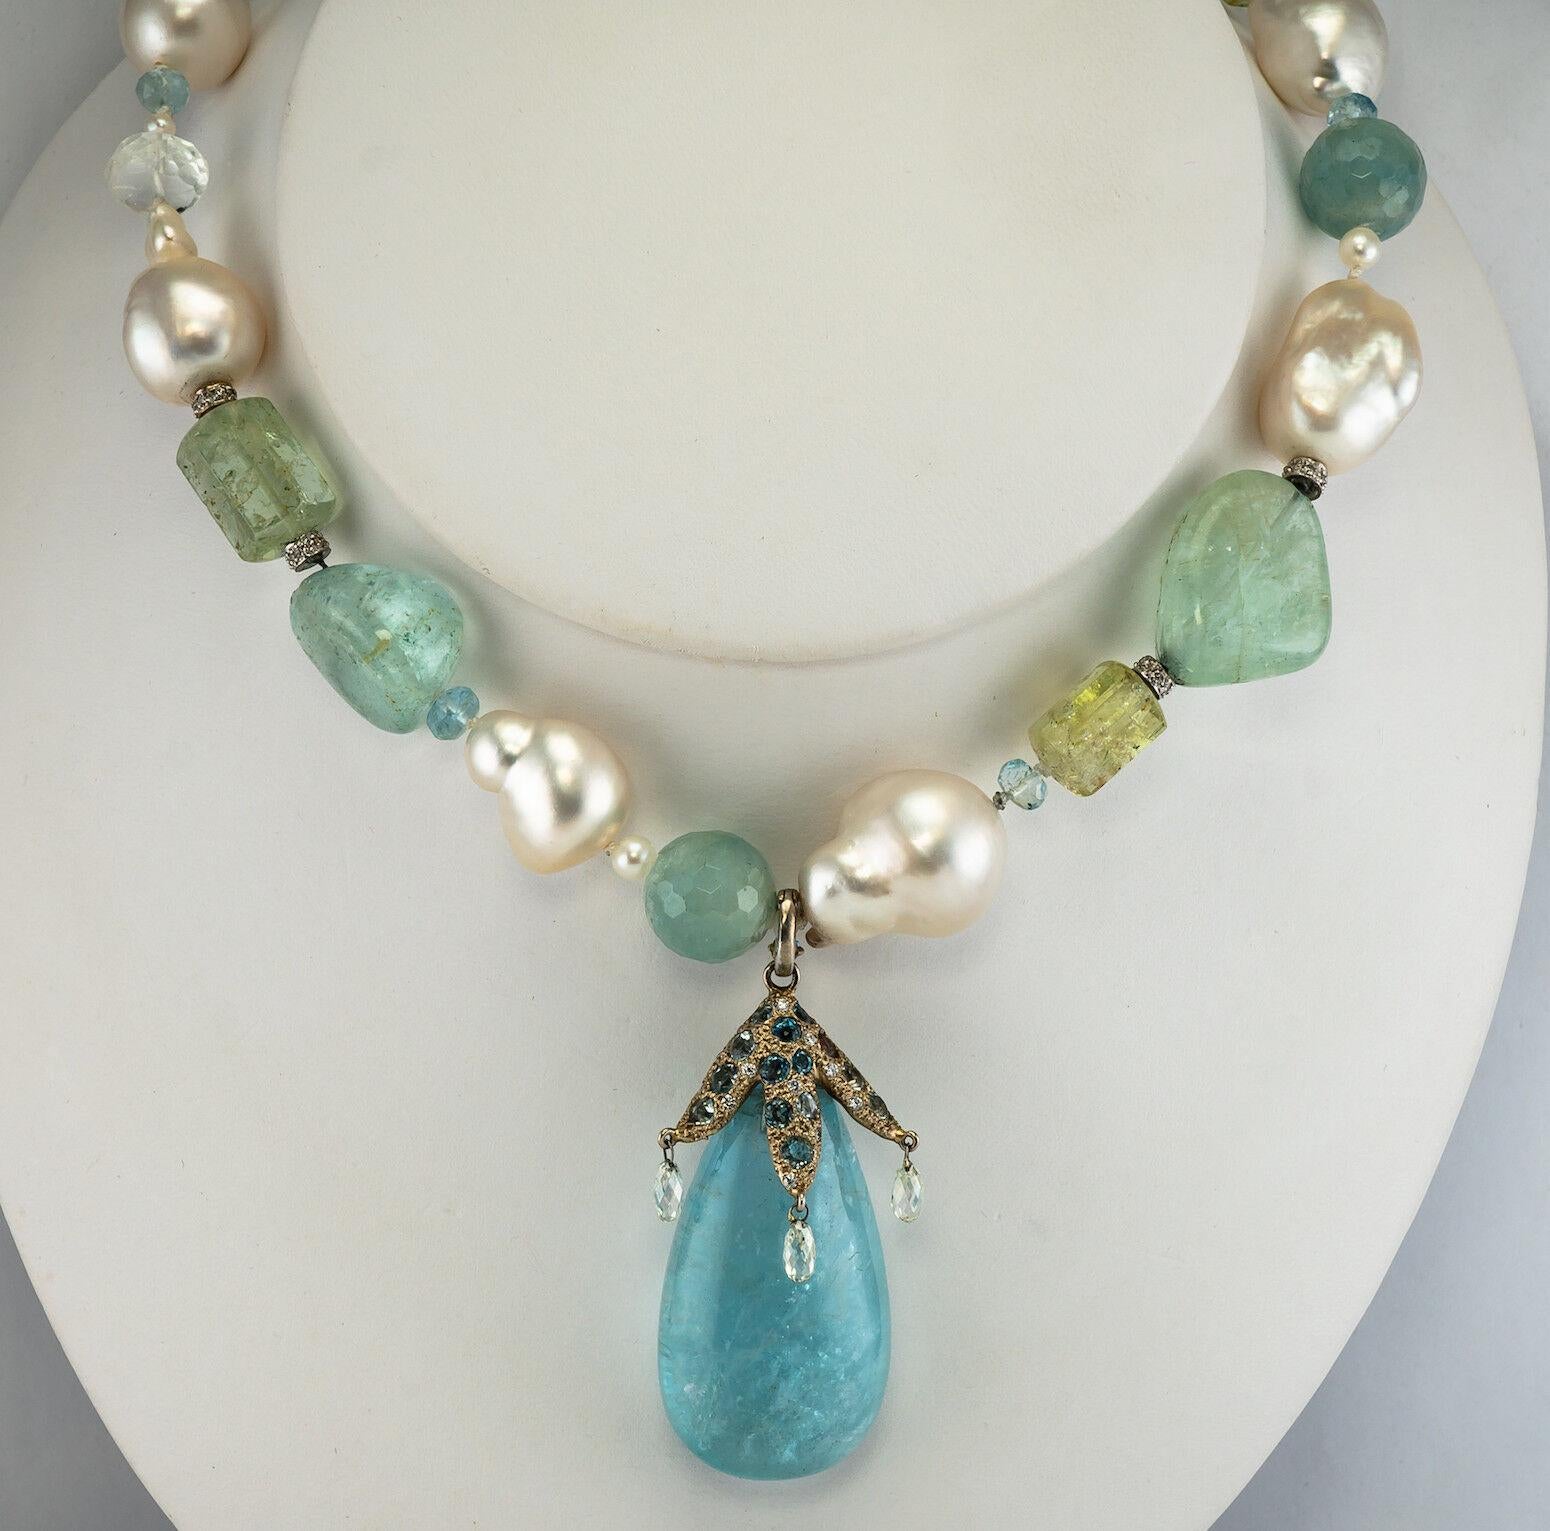 This stunning and spectacular Diamond Baroque Pearl Aquamarine Necklace necklace is definitely one of a kind! The necklace is made with all genuine gemstones: baroque pearls, aquamarines, solid gold and diamonds bead splits, green gemstones, rock